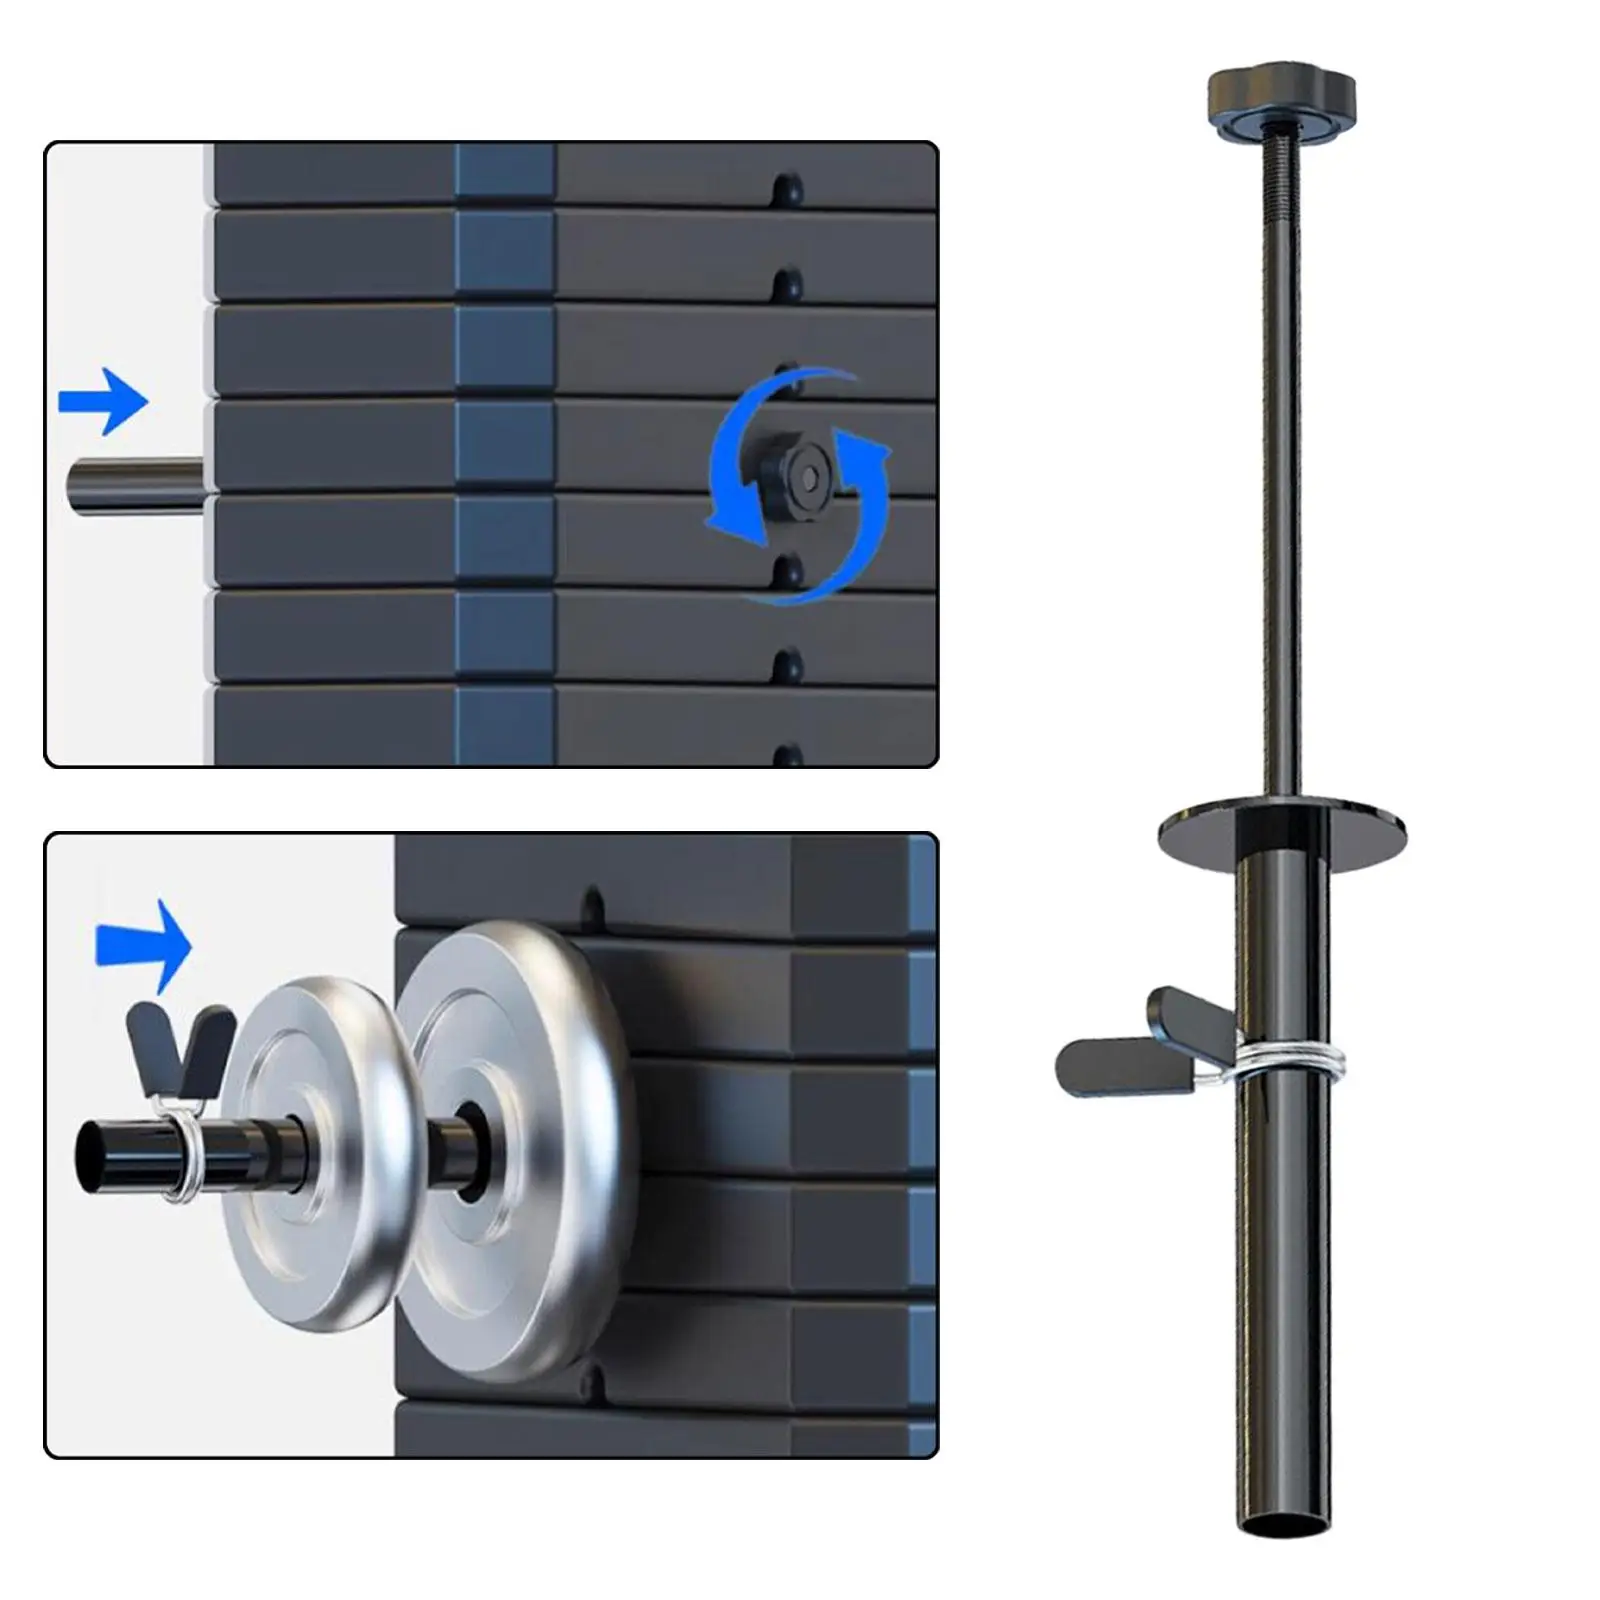 Gym Weight Stack Extender Barbell Parts Exercise Machine Weight Loading Pin